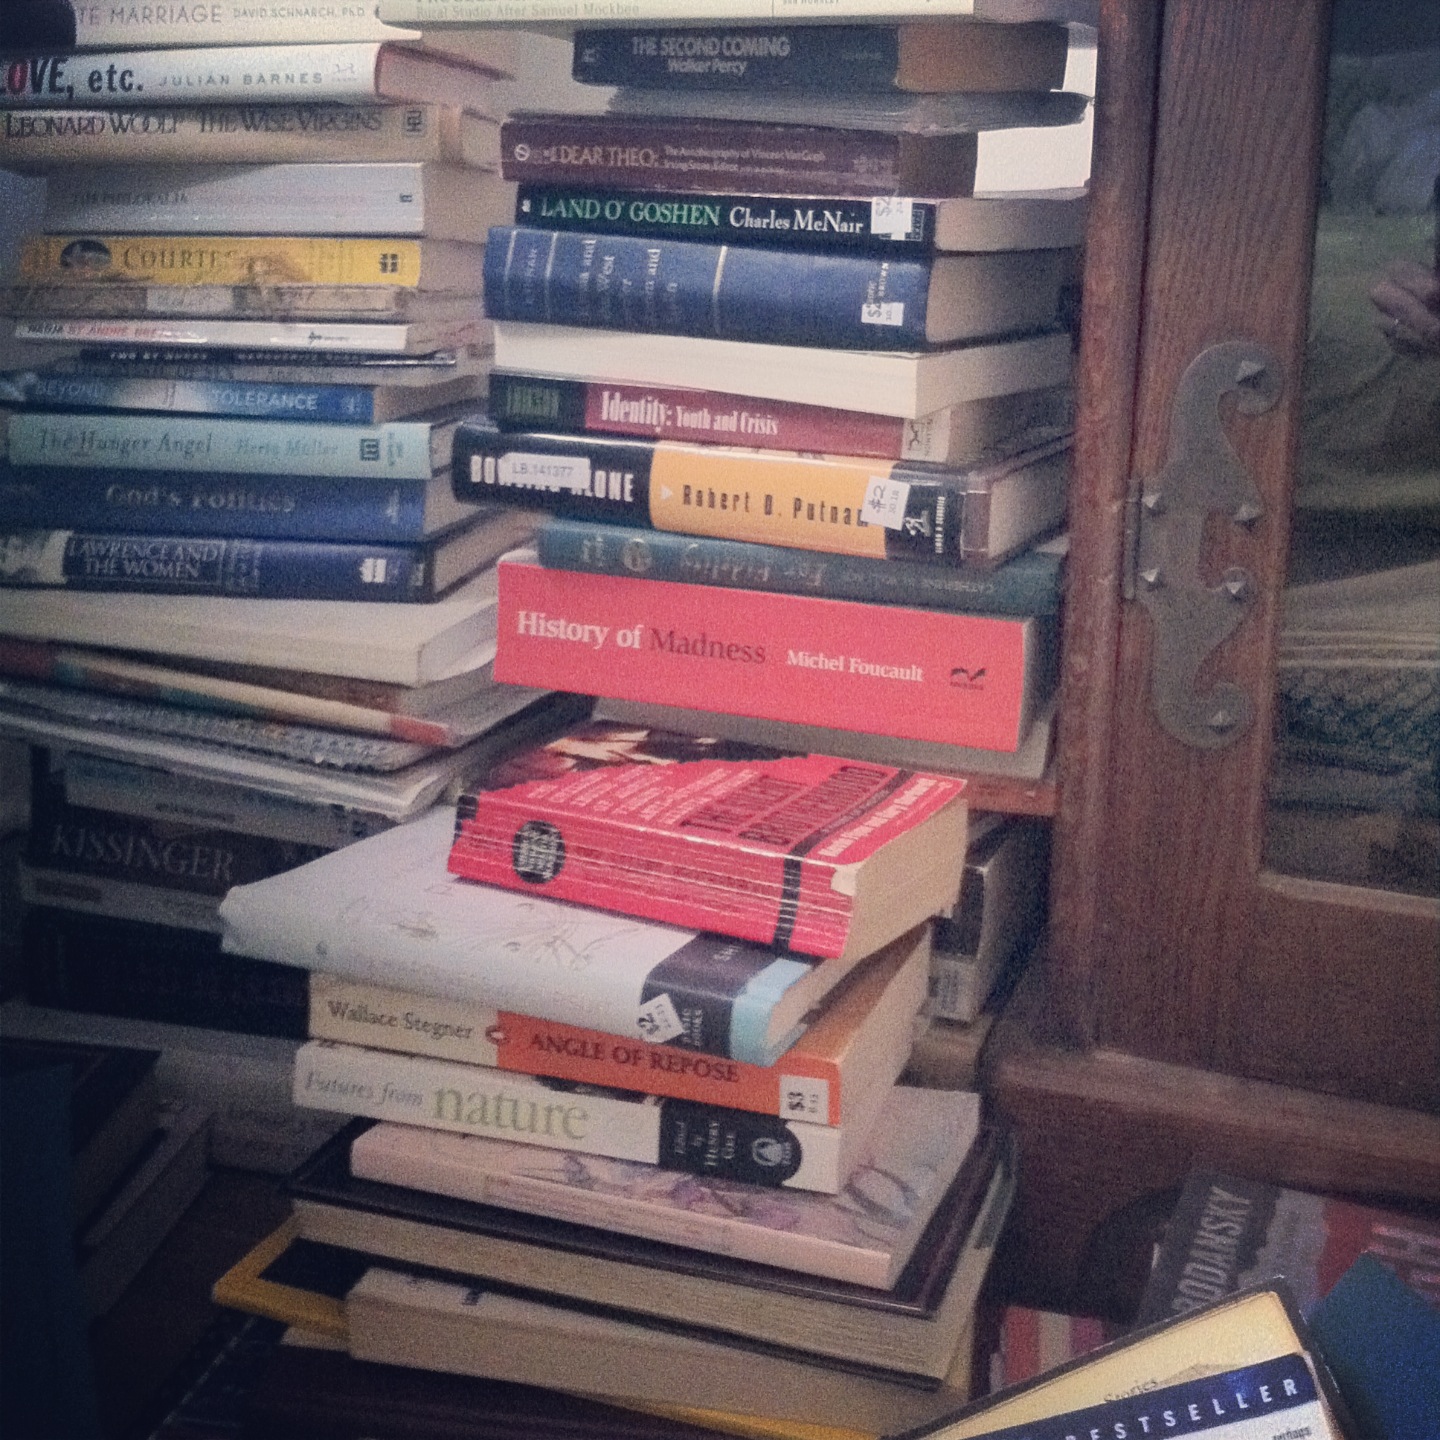 totalitarianism today: An intersection in that stack of books by the ...